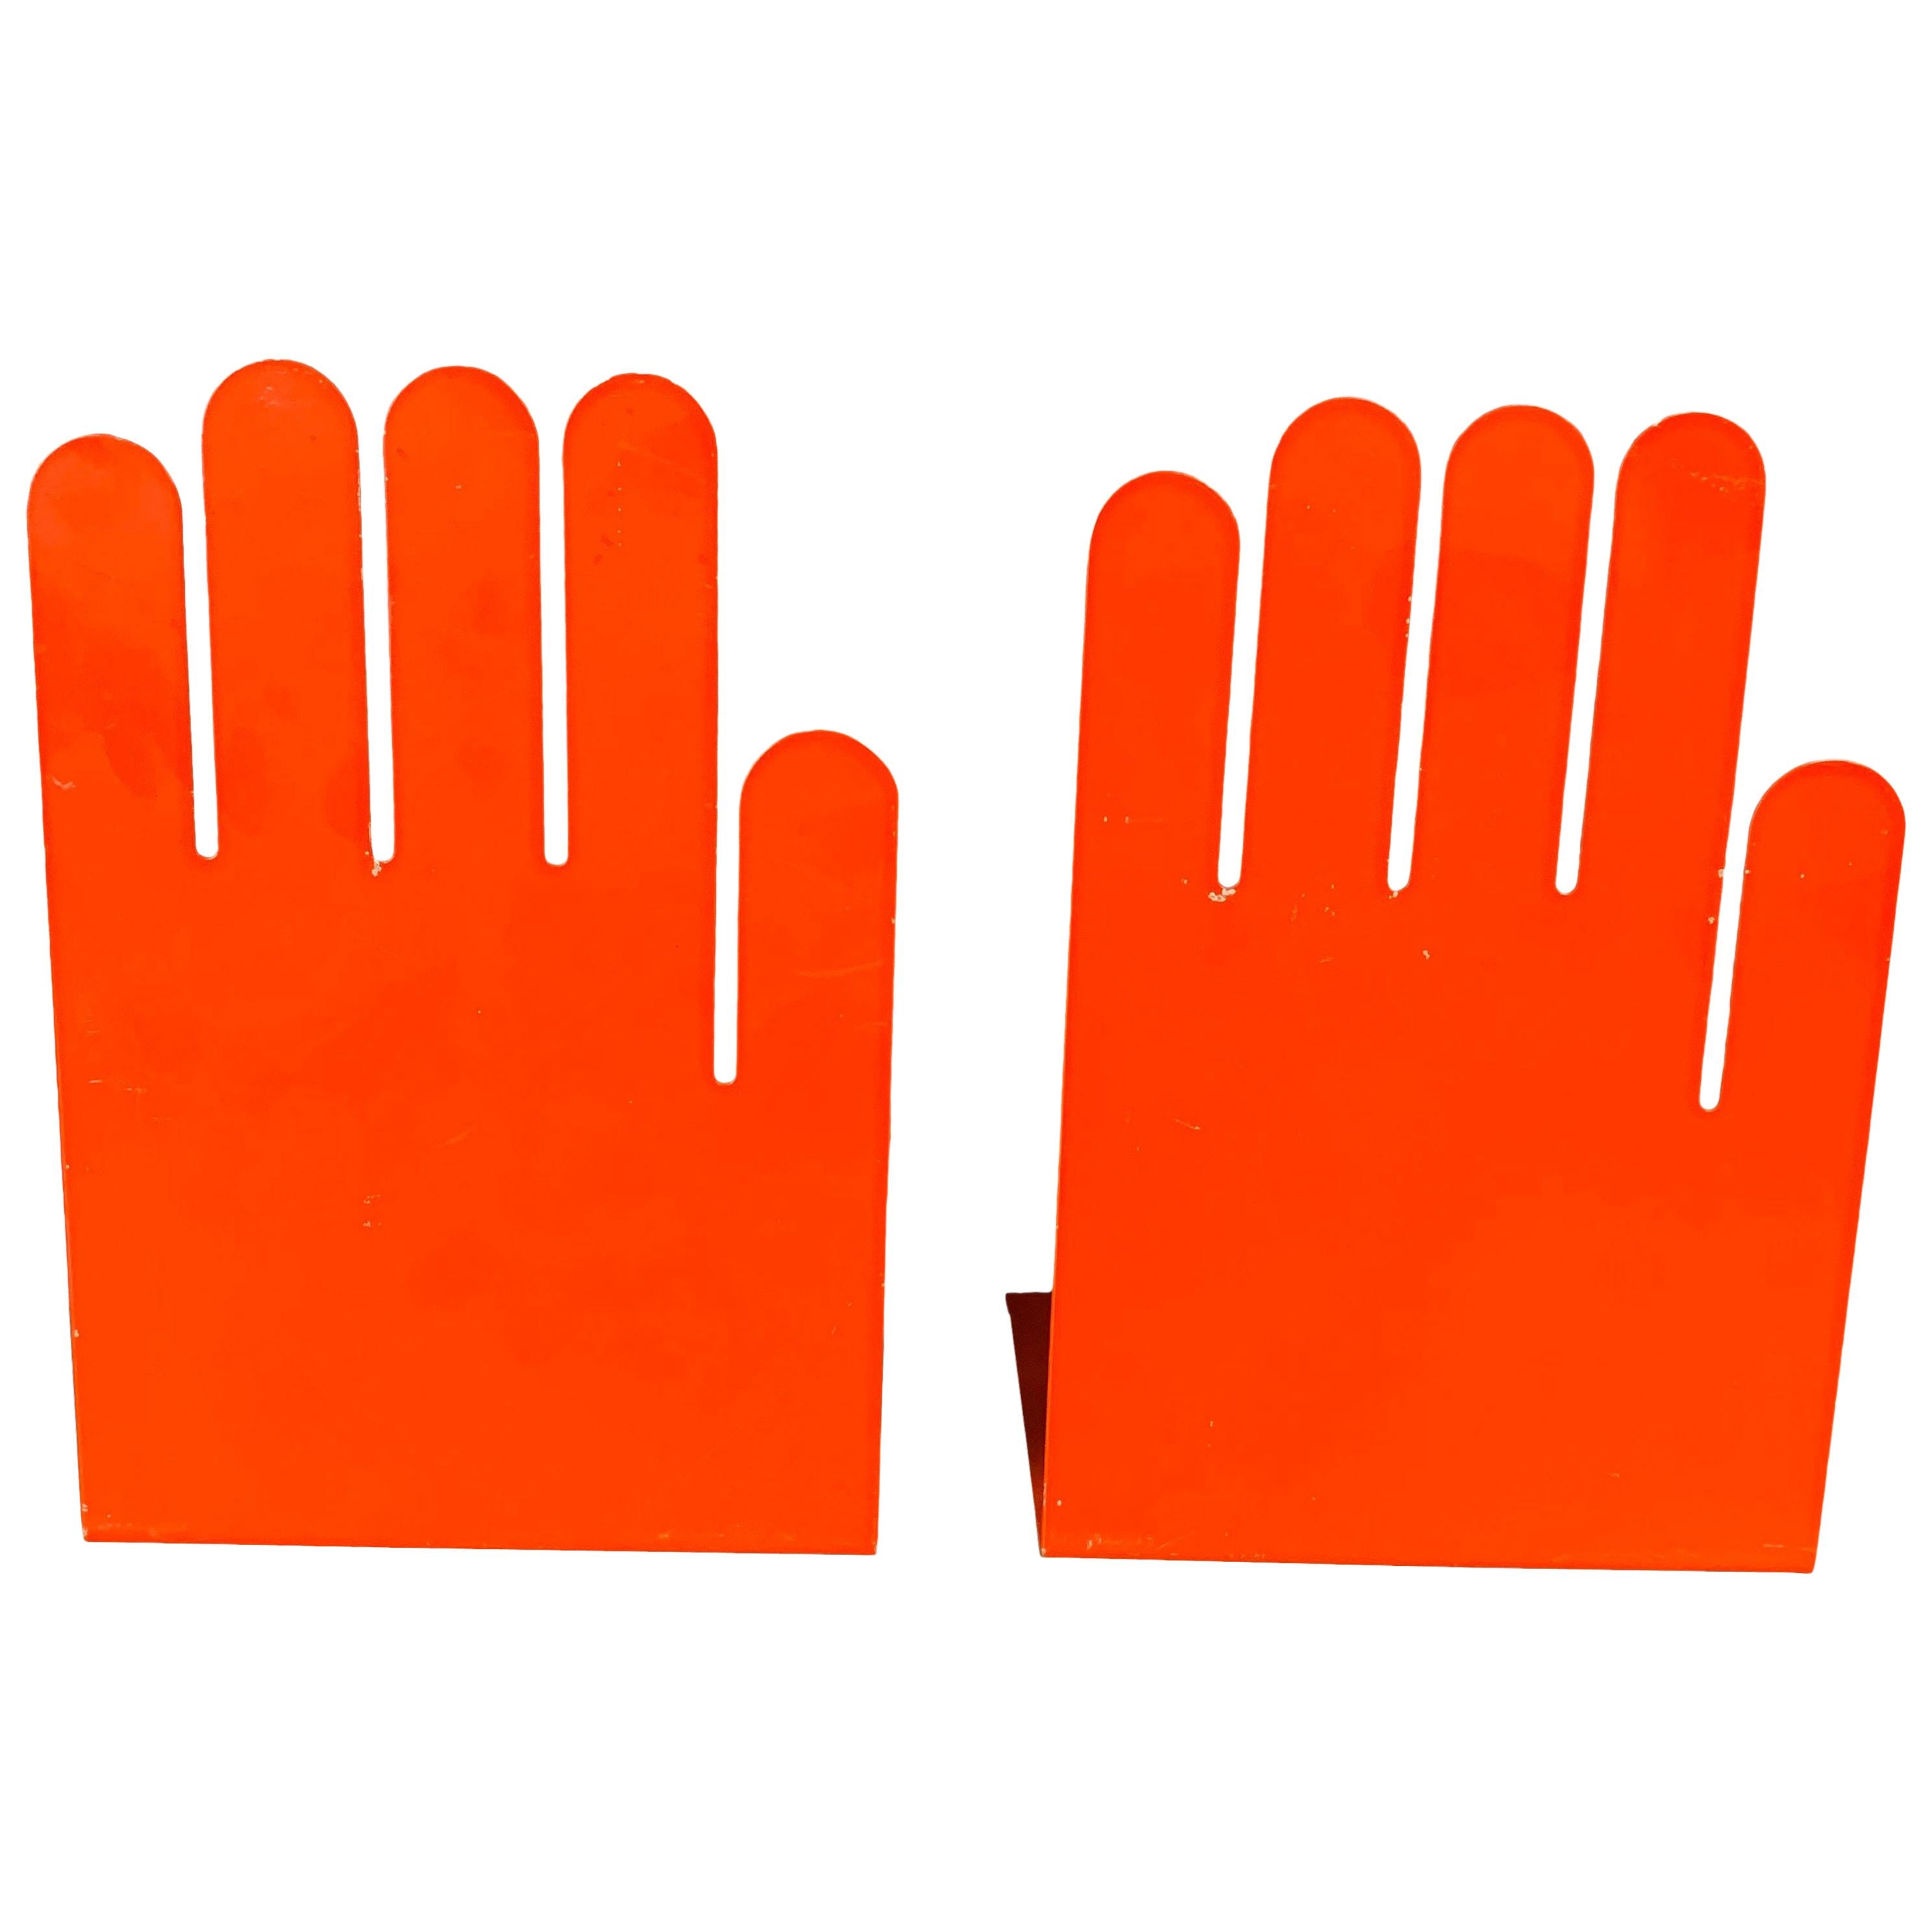 1980s Postmodern Orange Hand Bookends, a Pair